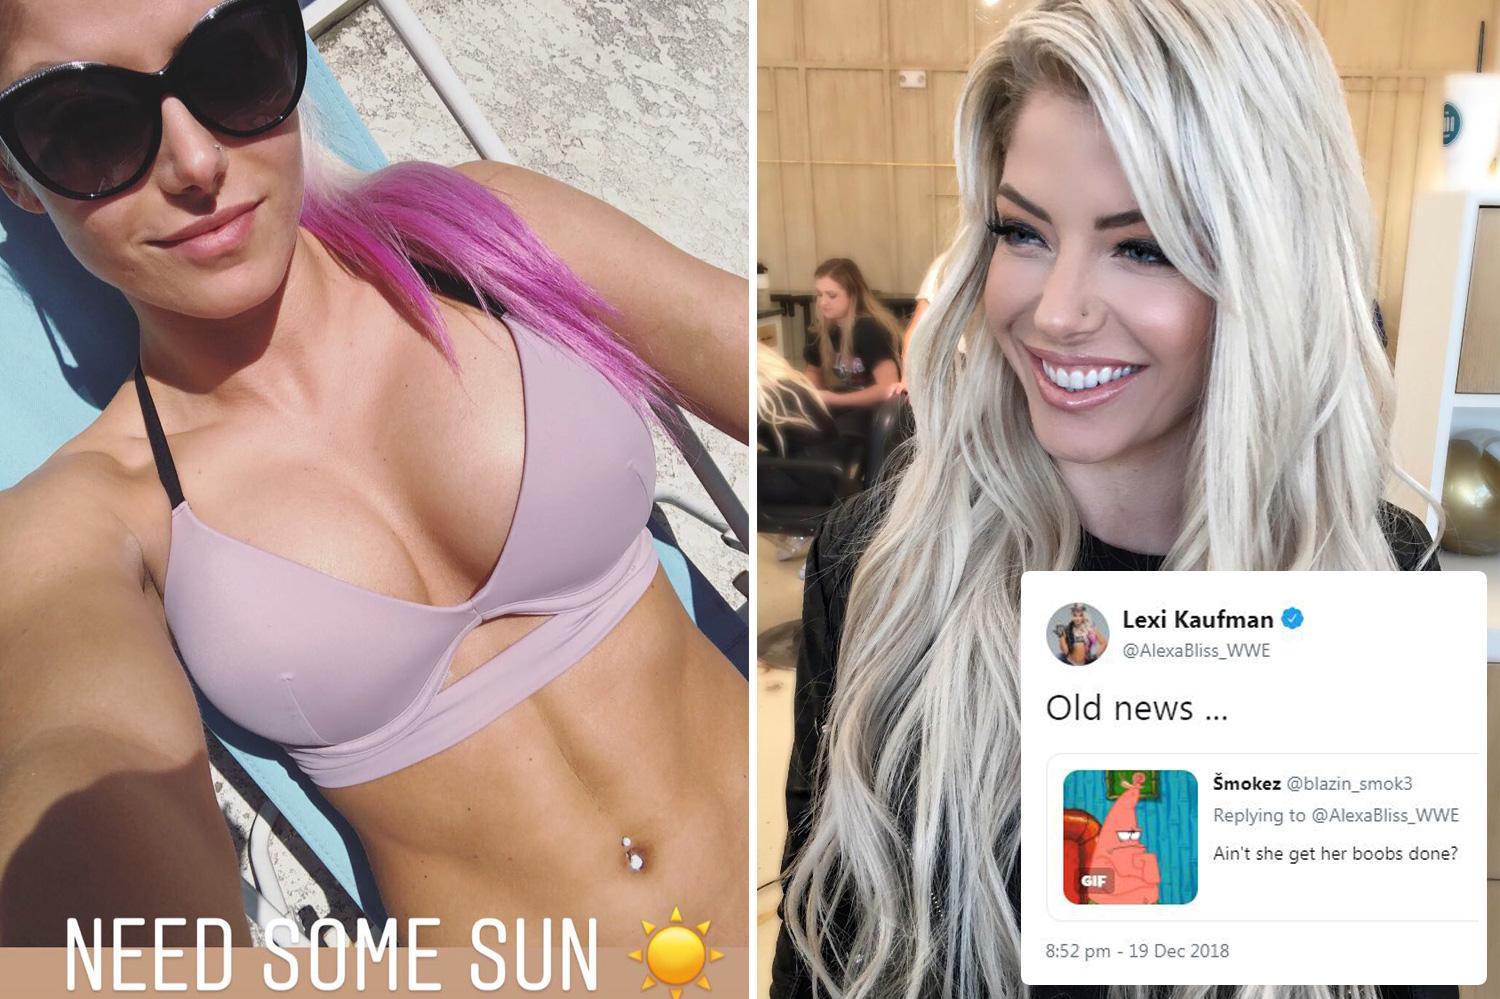 clarissa andrews recommends alexa bliss nudes pic